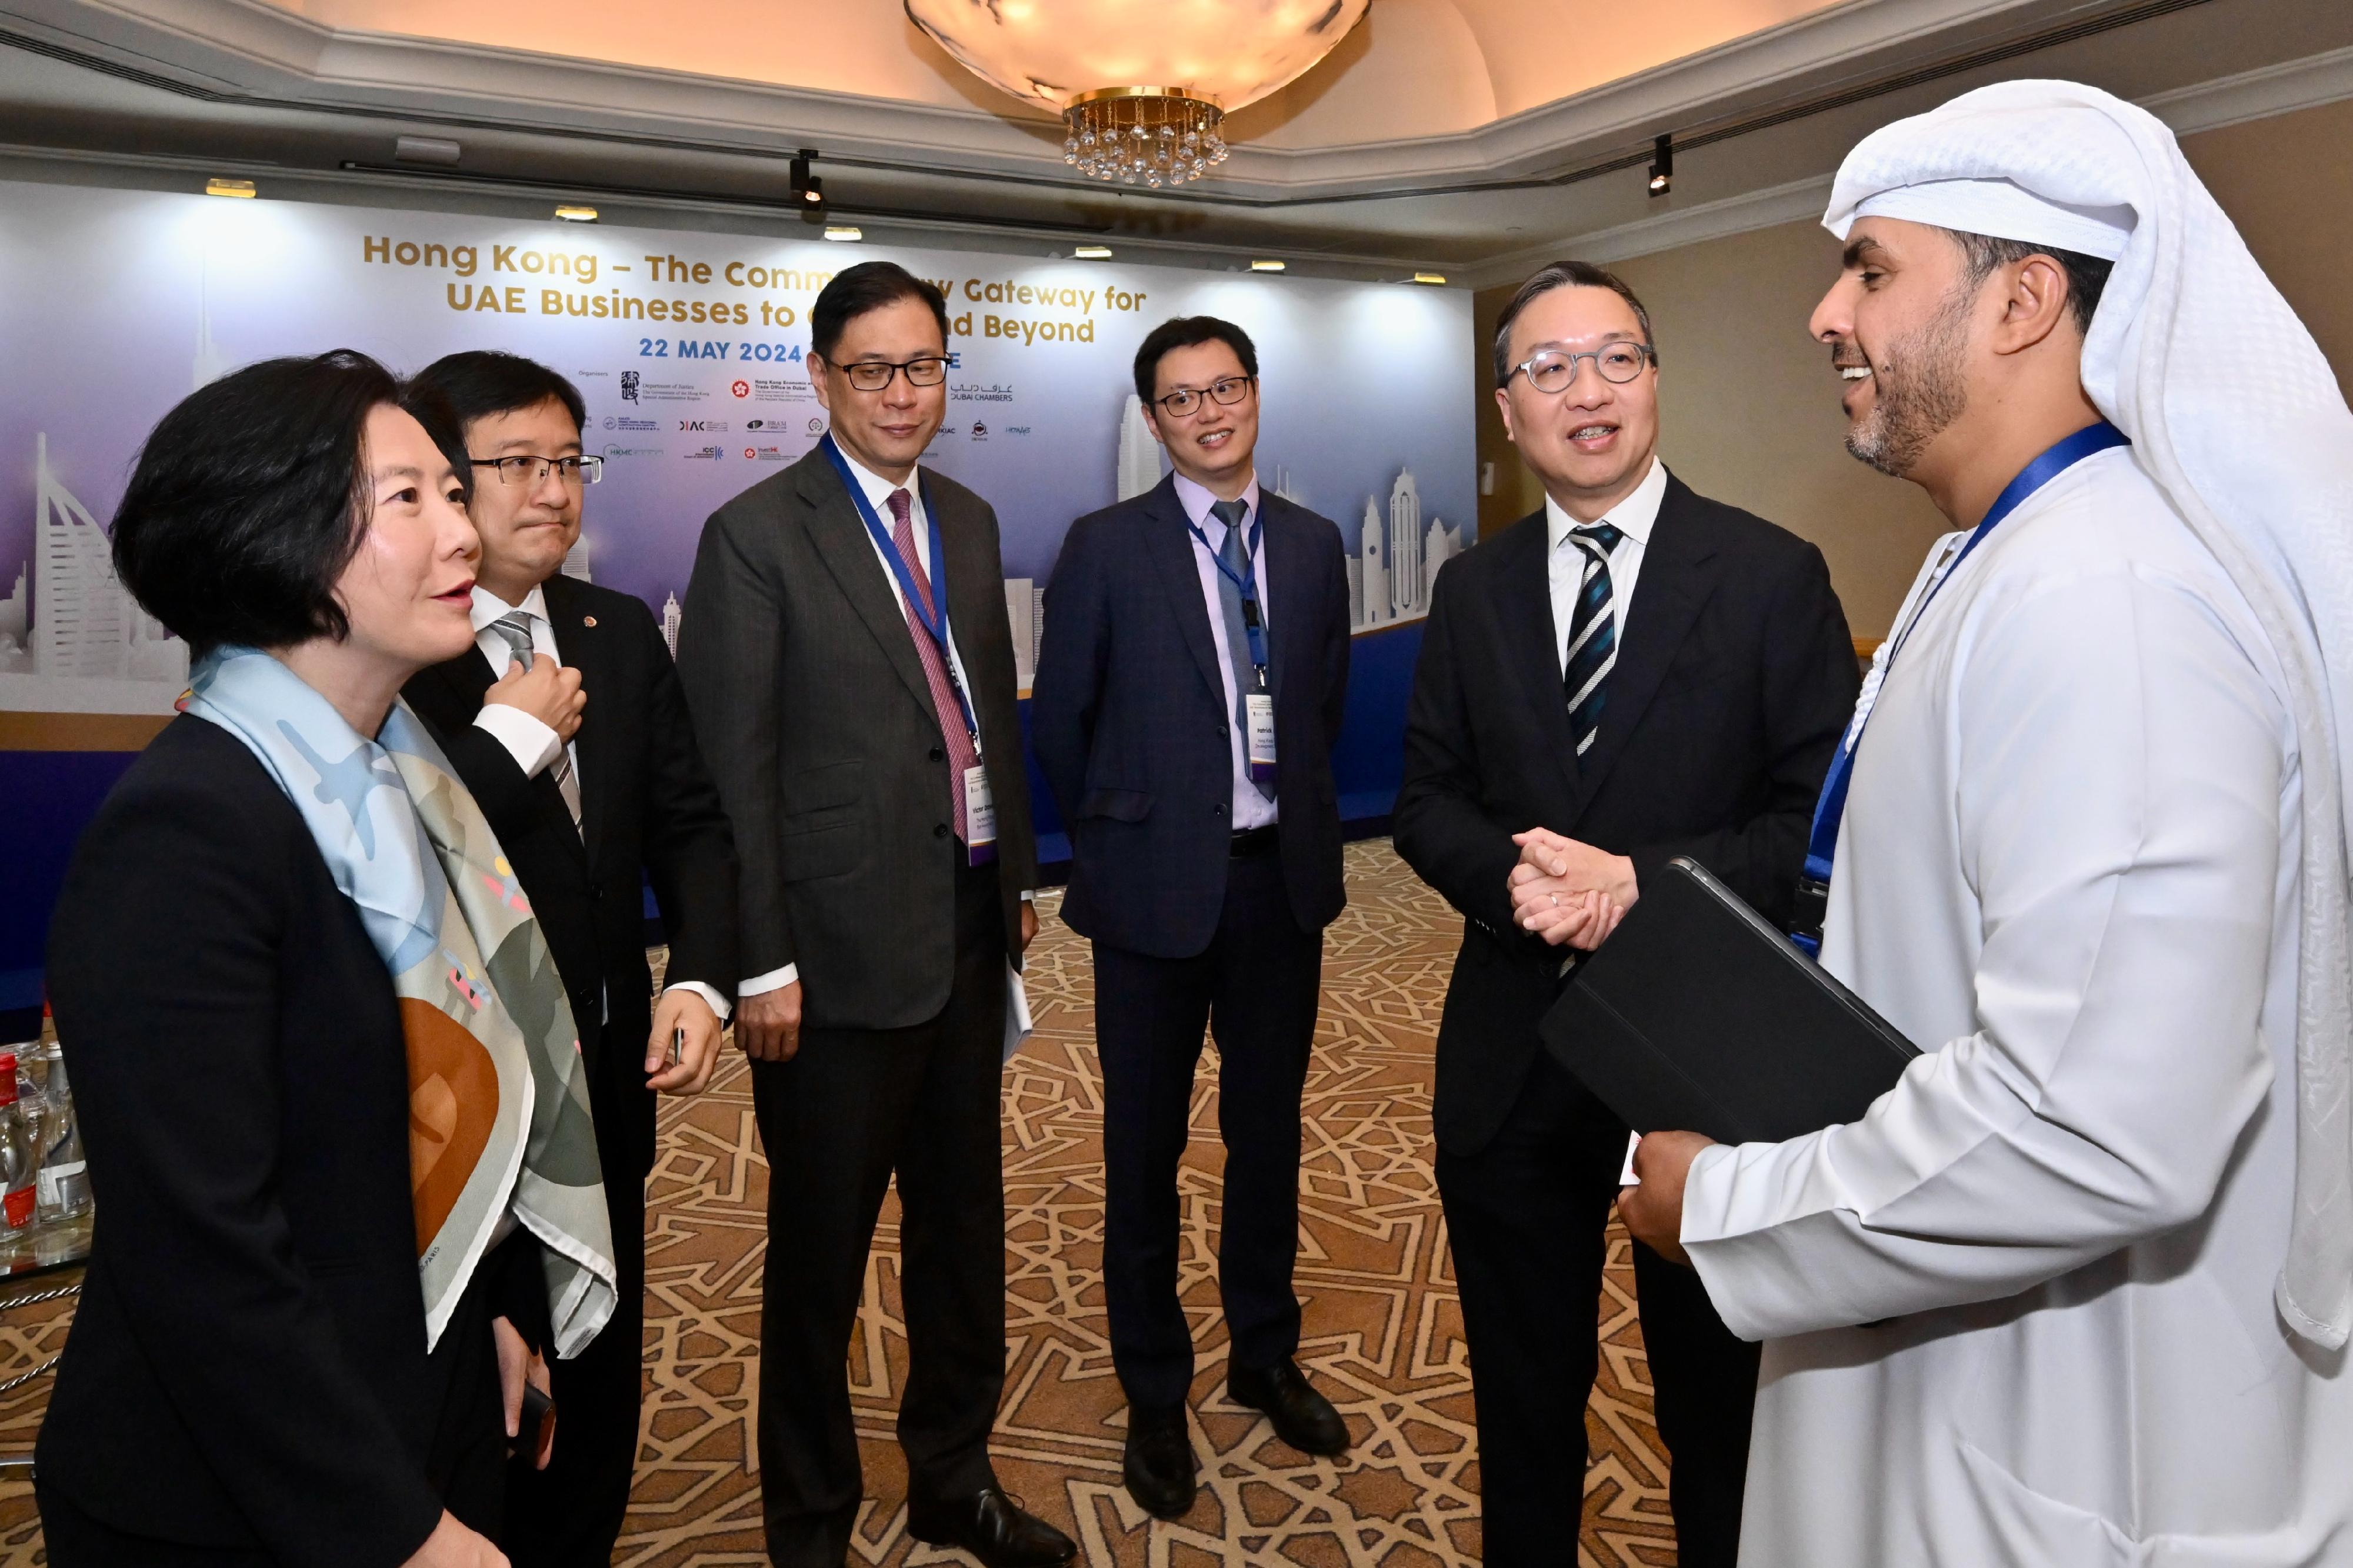 The Secretary for Justice, Mr Paul Lam, SC, continued his visit to Dubai, the United Arab Emirates (UAE), today (May 22, Dubai time) to attend a forum titled Hong Kong - The Common Law Gateway for UAE Businesses to China and Beyond for promoting Hong Kong's legal and dispute resolution services. Photo shows (from second right) Mr Lam; Deputy Executive Director of the Hong Kong Trade Development Council Dr Patrick Lau; the Chairman of the Hong Kong Bar Association, Mr Victor Dawes, SC; the President of the Law Society of Hong Kong, Mr Chan Chak-ming; and the Director-General of Investment Promotion, Ms Alpha Lau, exchanging views with the Minister of Justice of the UAE, Mr Abdullah bin Sultan bin Awad Al Nuaimi (first right).
